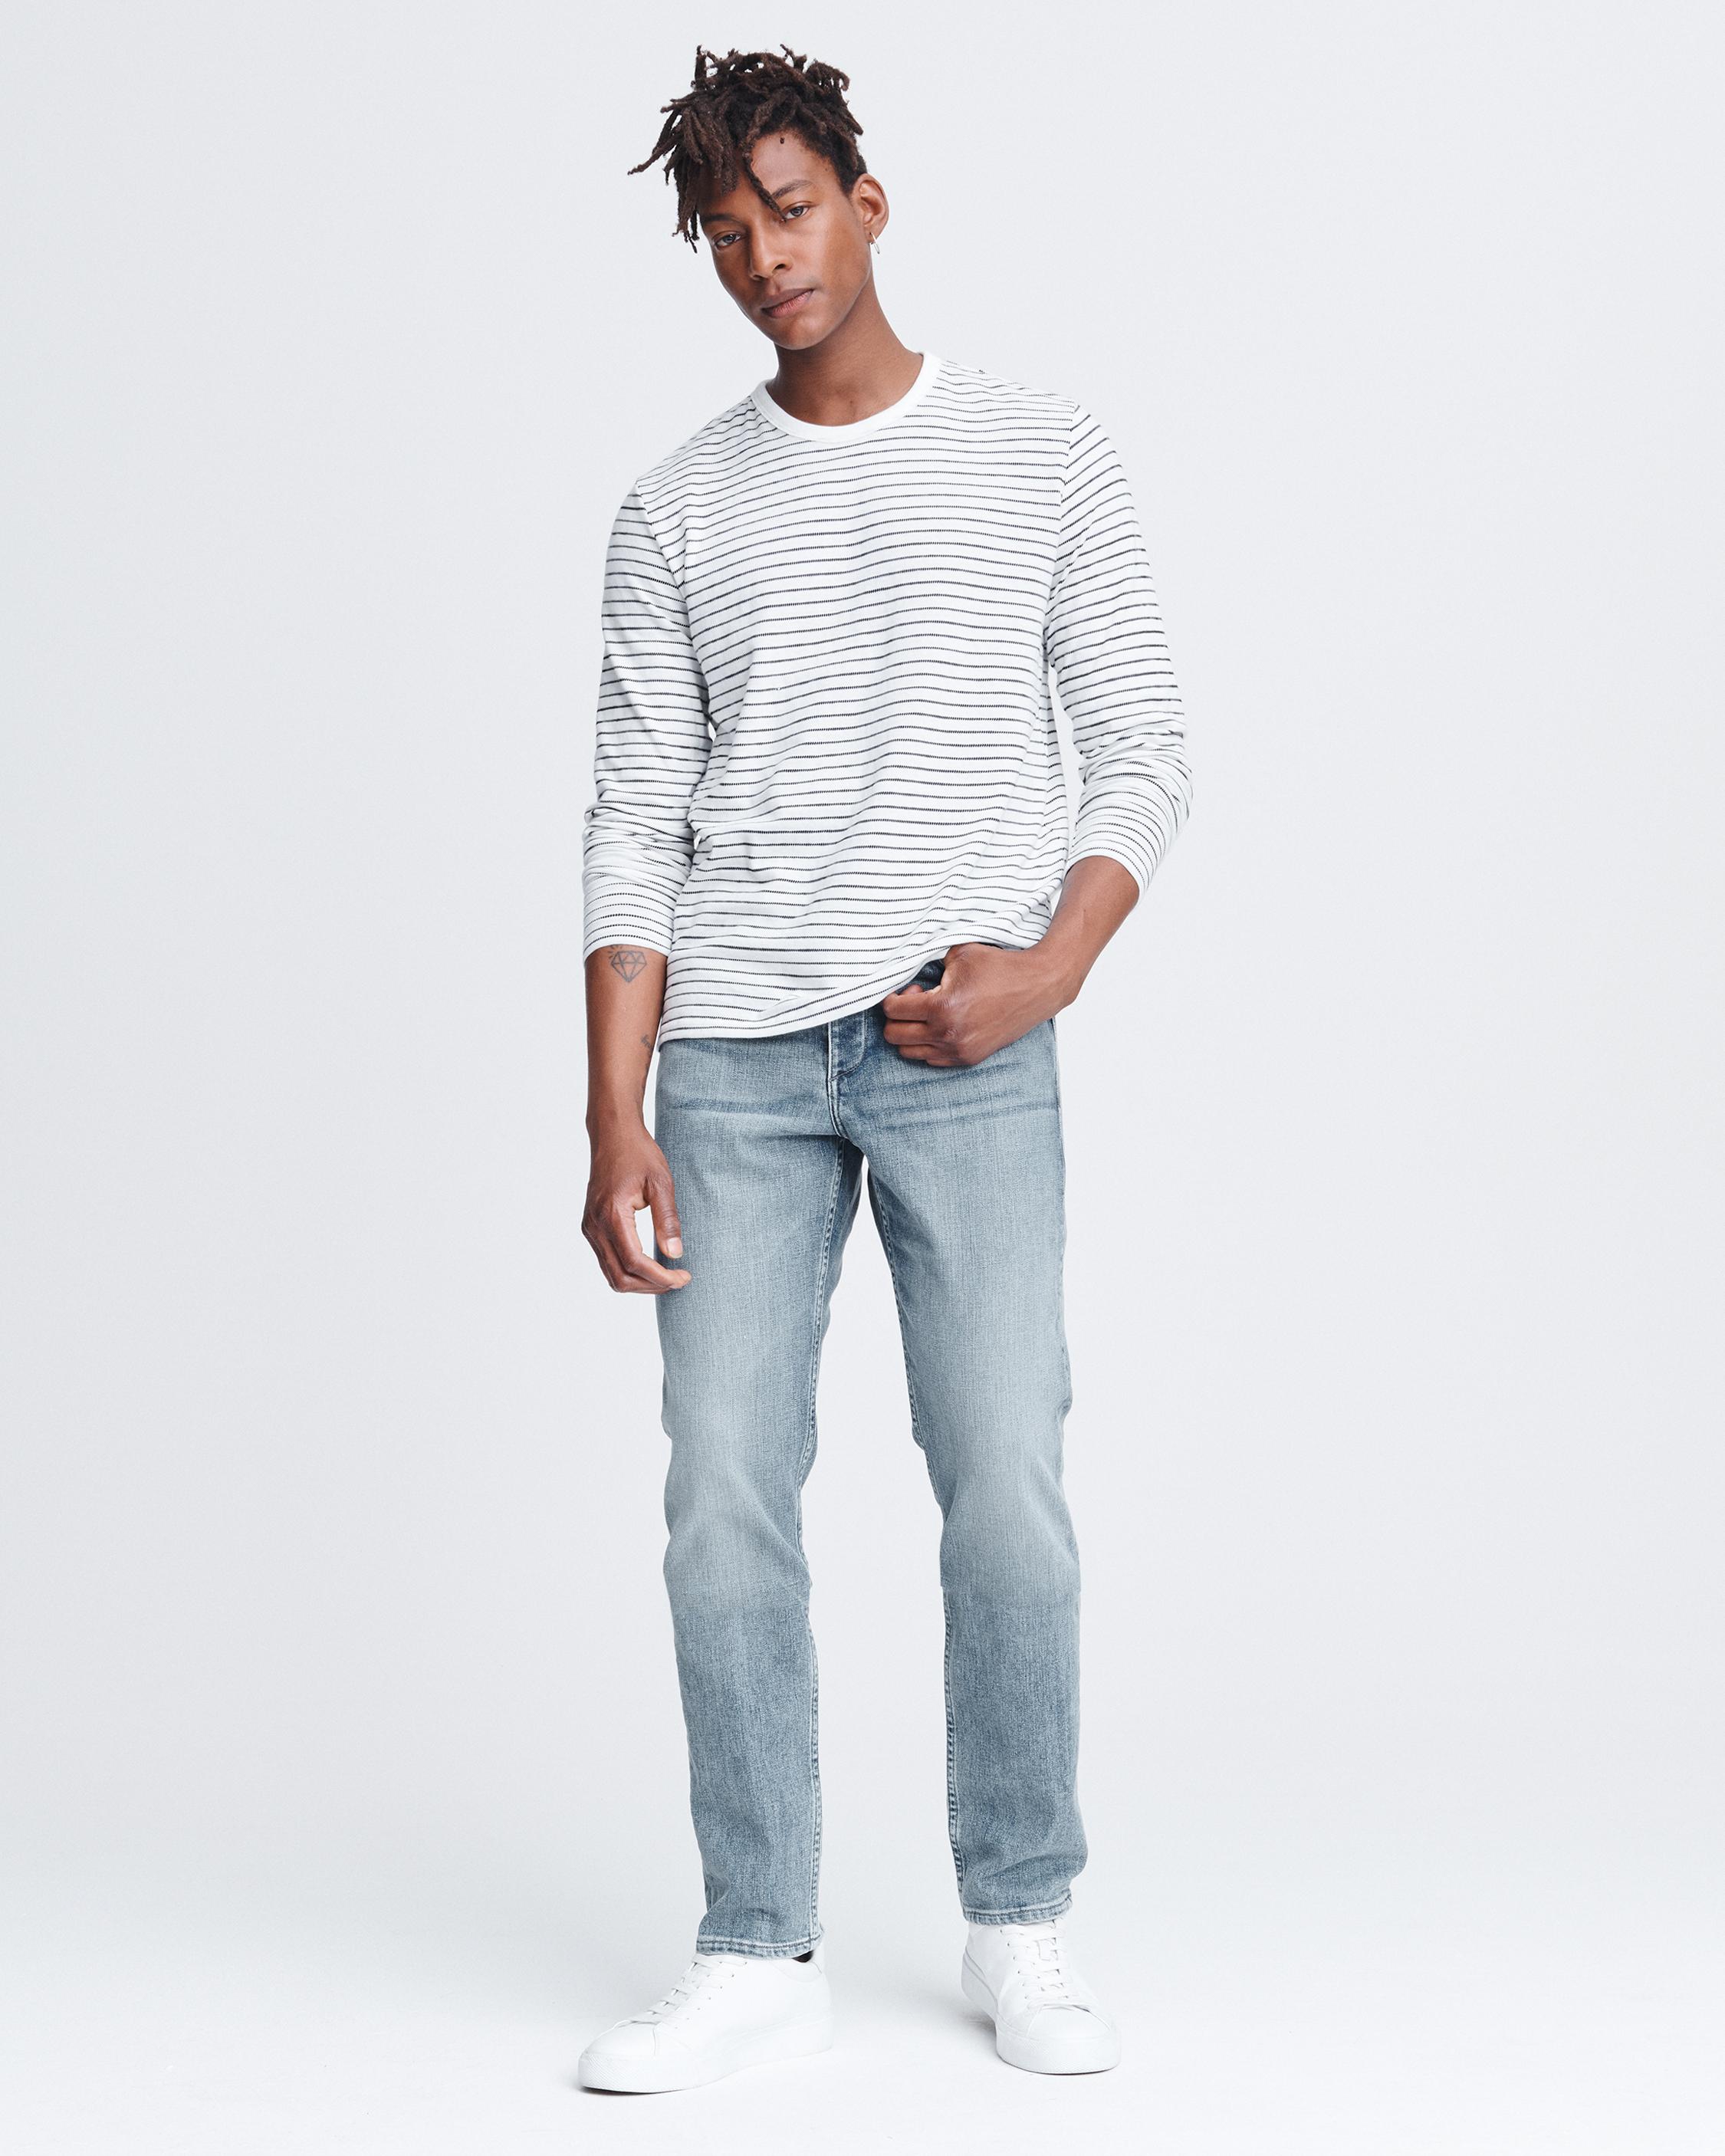 rag and bone fit 3 jeans